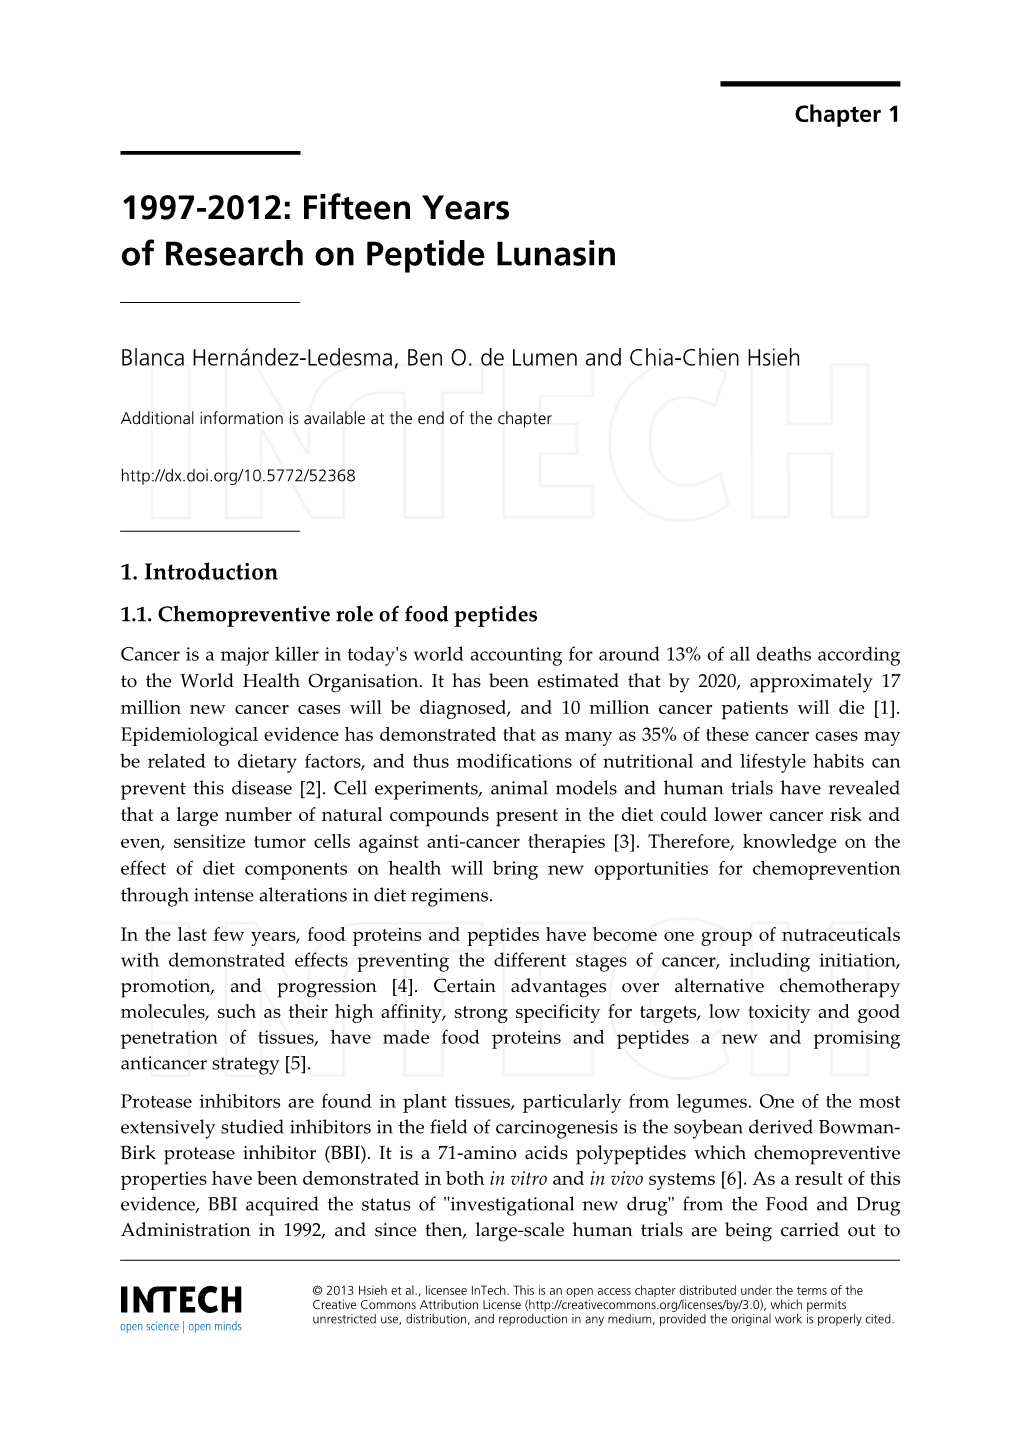 Fifteen Years of Research on Peptide Lunasin